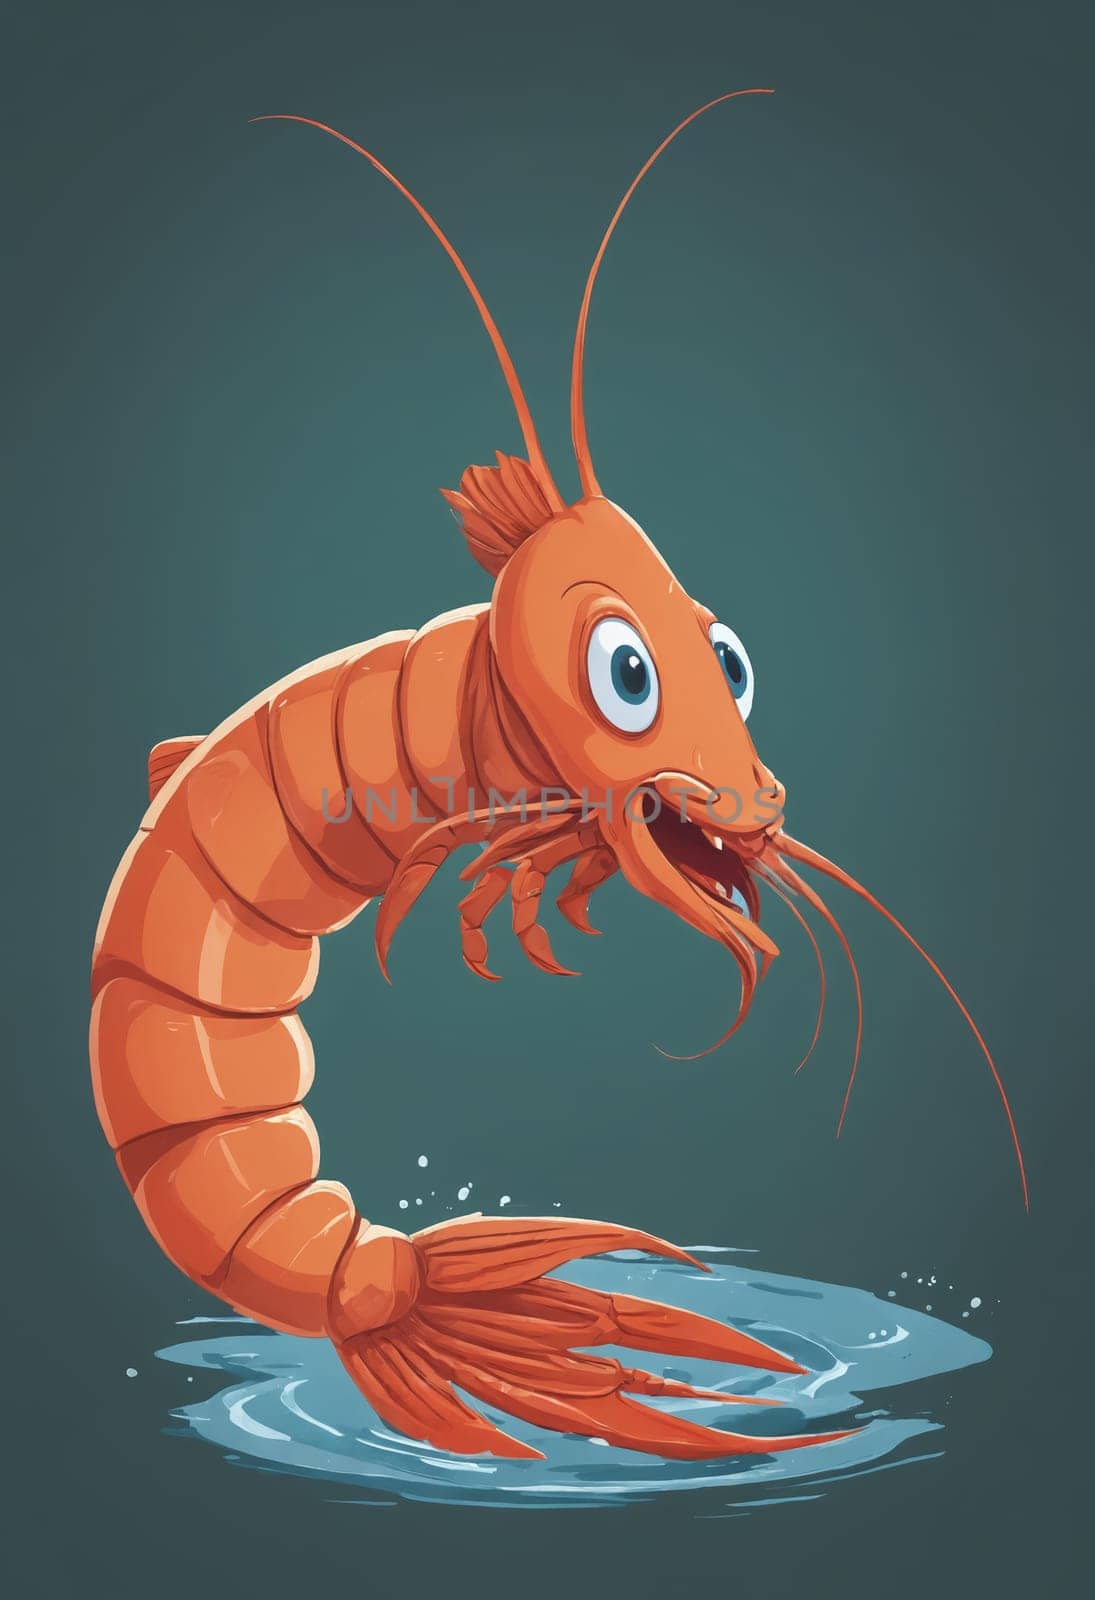 Delightful animated shrimp with a charming smile exploring the deep blue.